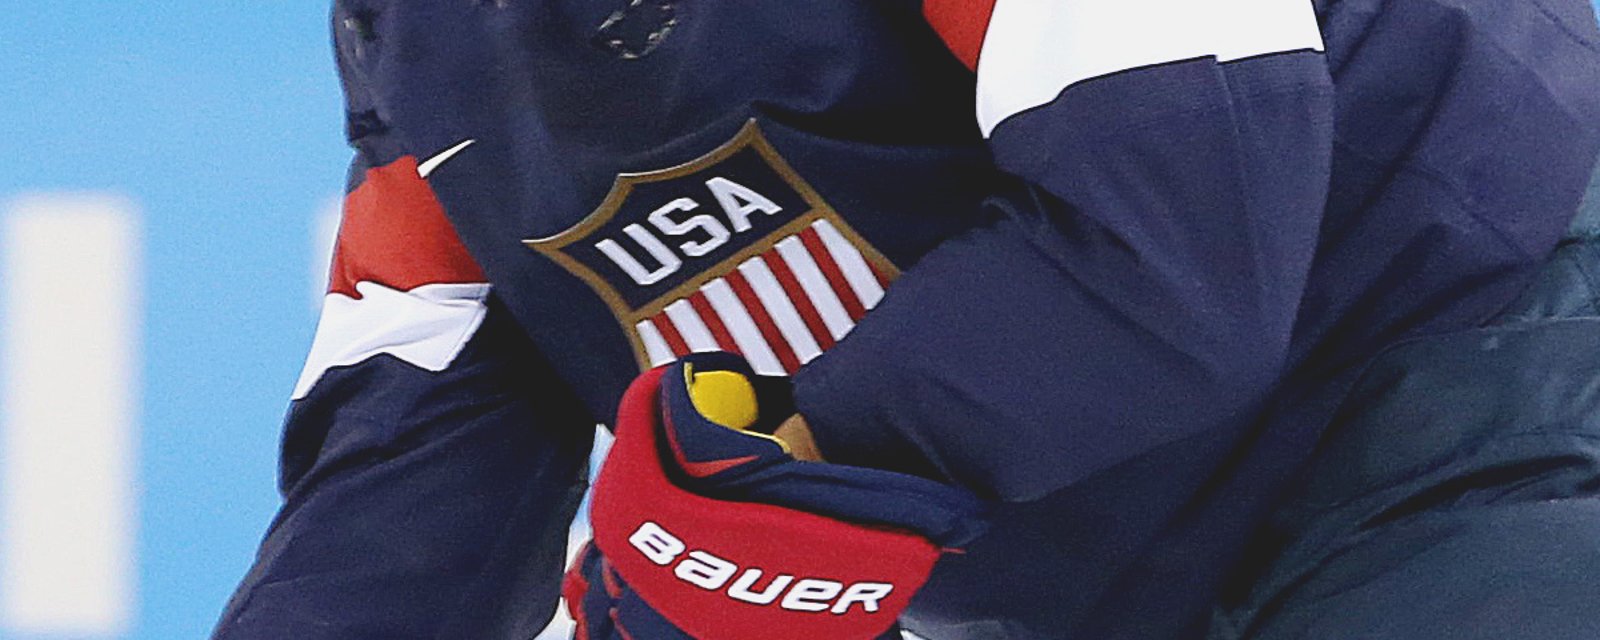 Breaking: Team USA will likely not participate to world championships.